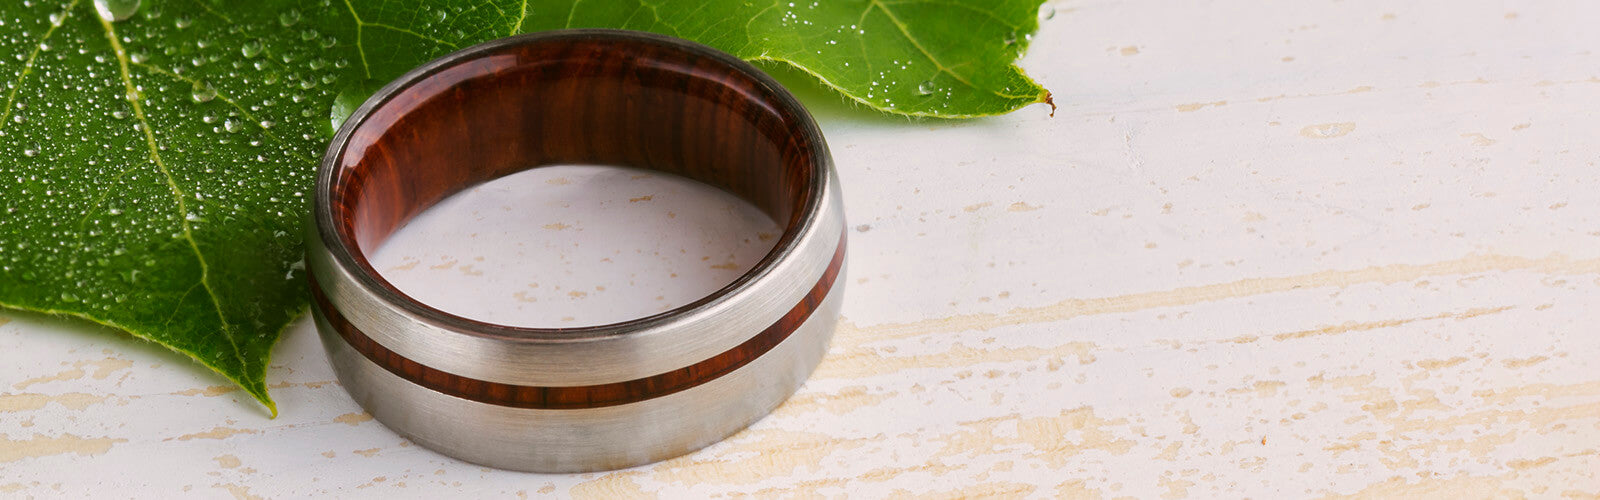 Wedding Band with Wood on the Inside